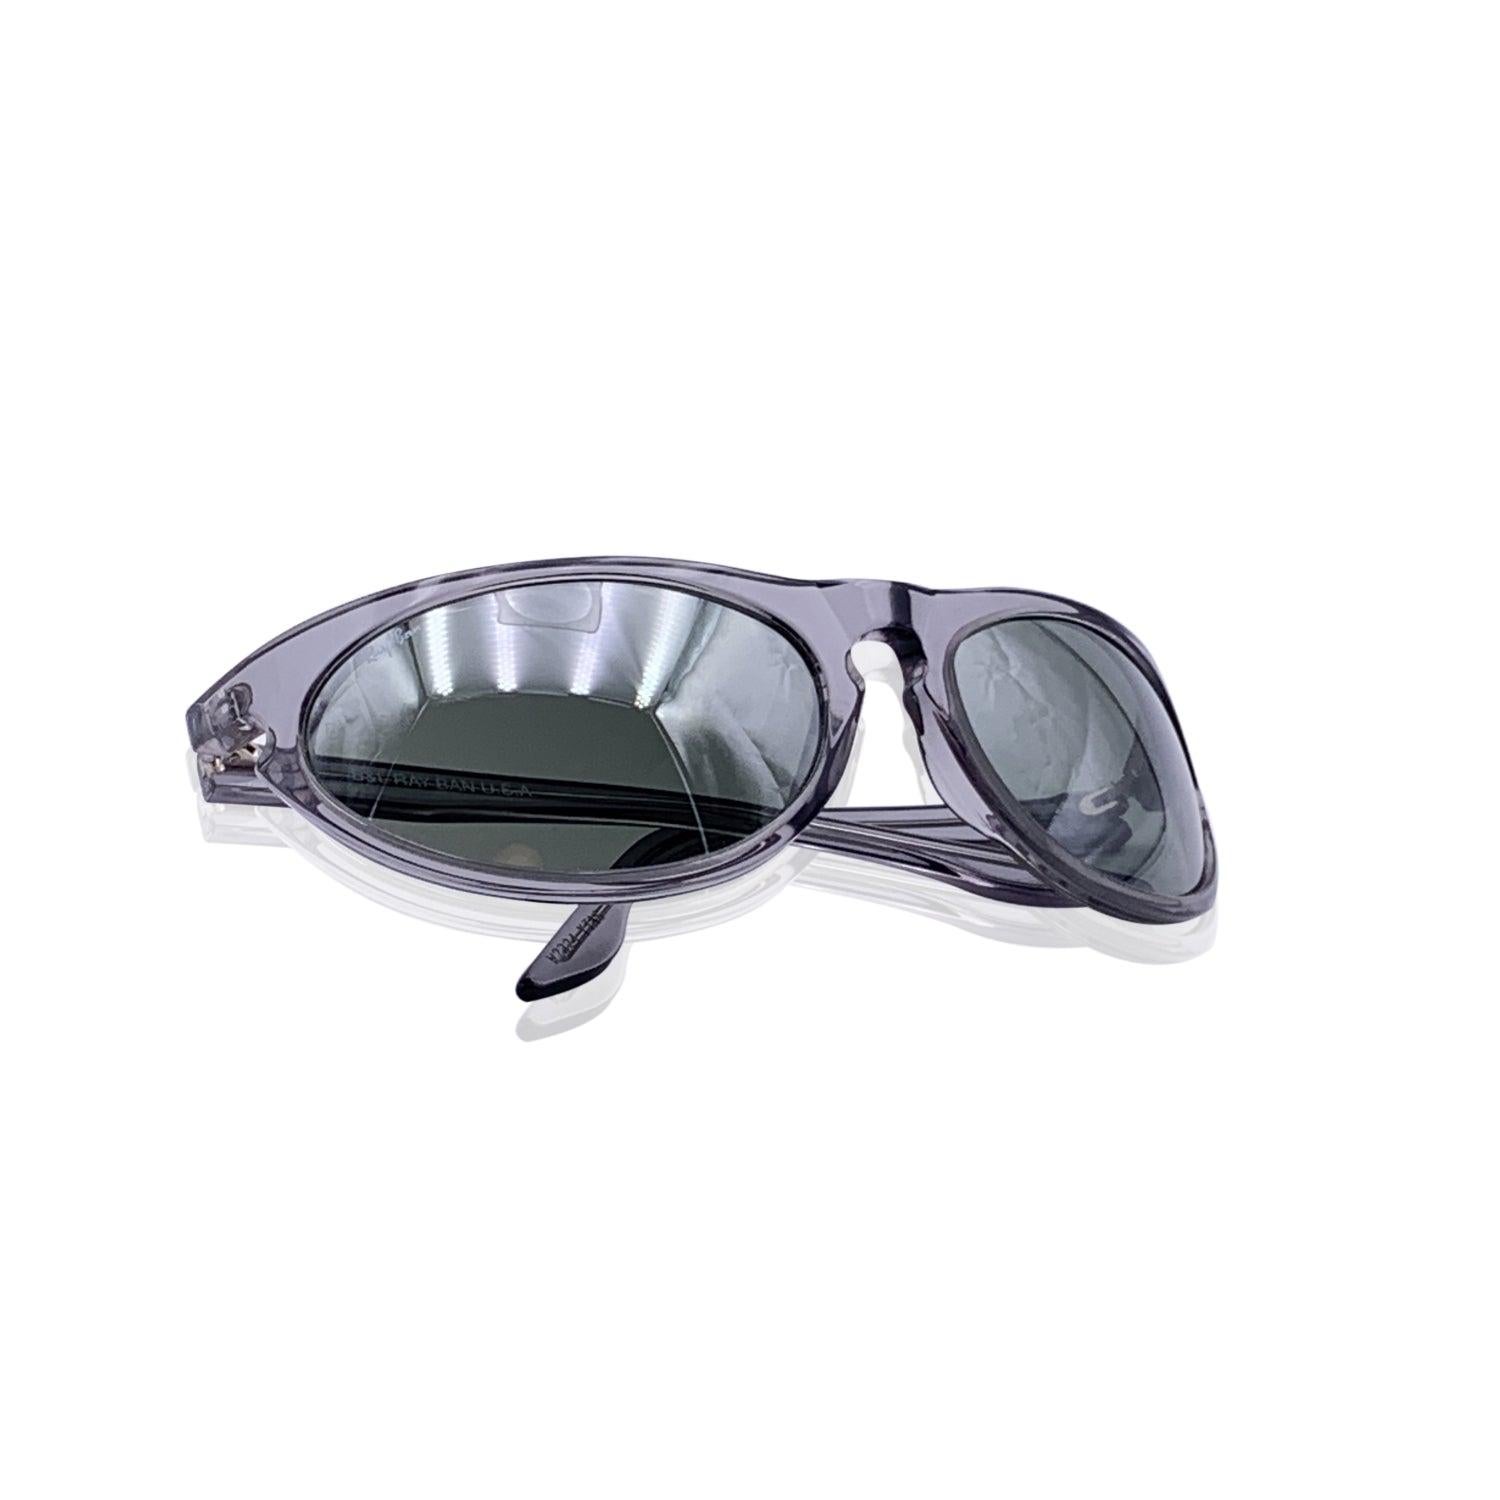 Vintage sunglasses by Ray-Ban Bausch & Lomb, mod. W 2324 Sidestreet. Clear grey acetate frame . Wrap design. Mirrored Grey original lens, with BL etched on both corners. Made in USA Details MATERIAL: Acetate COLOR: Grey MODEL: W2324 Sidestreet